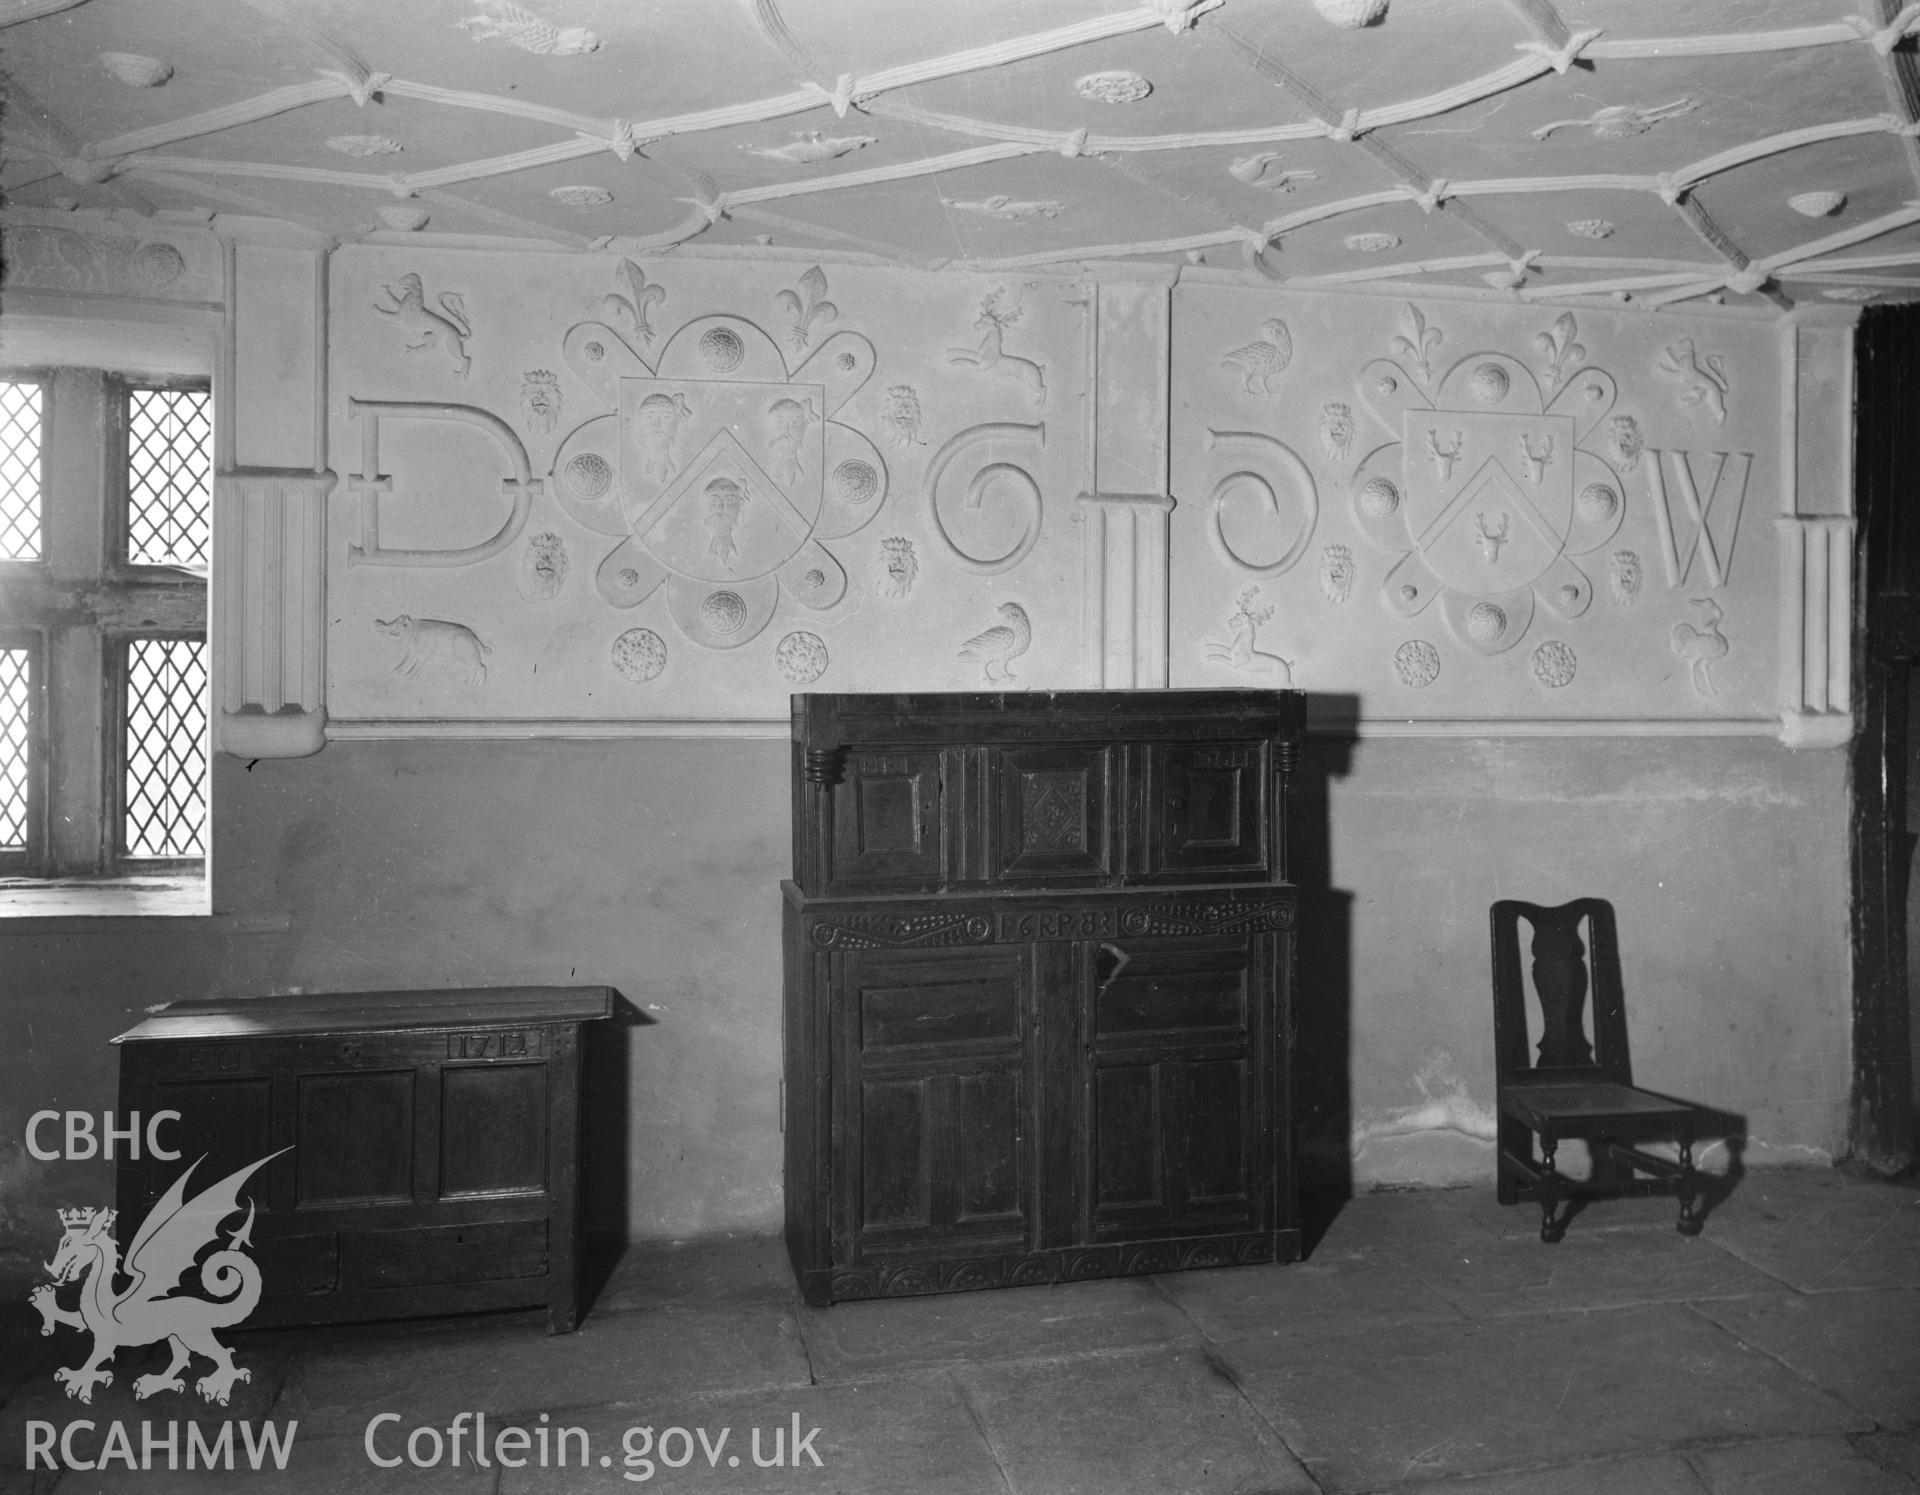 Interior view of Plas Mawr, showing decorated plaster wall and ceiling, taken 06.08.1950.